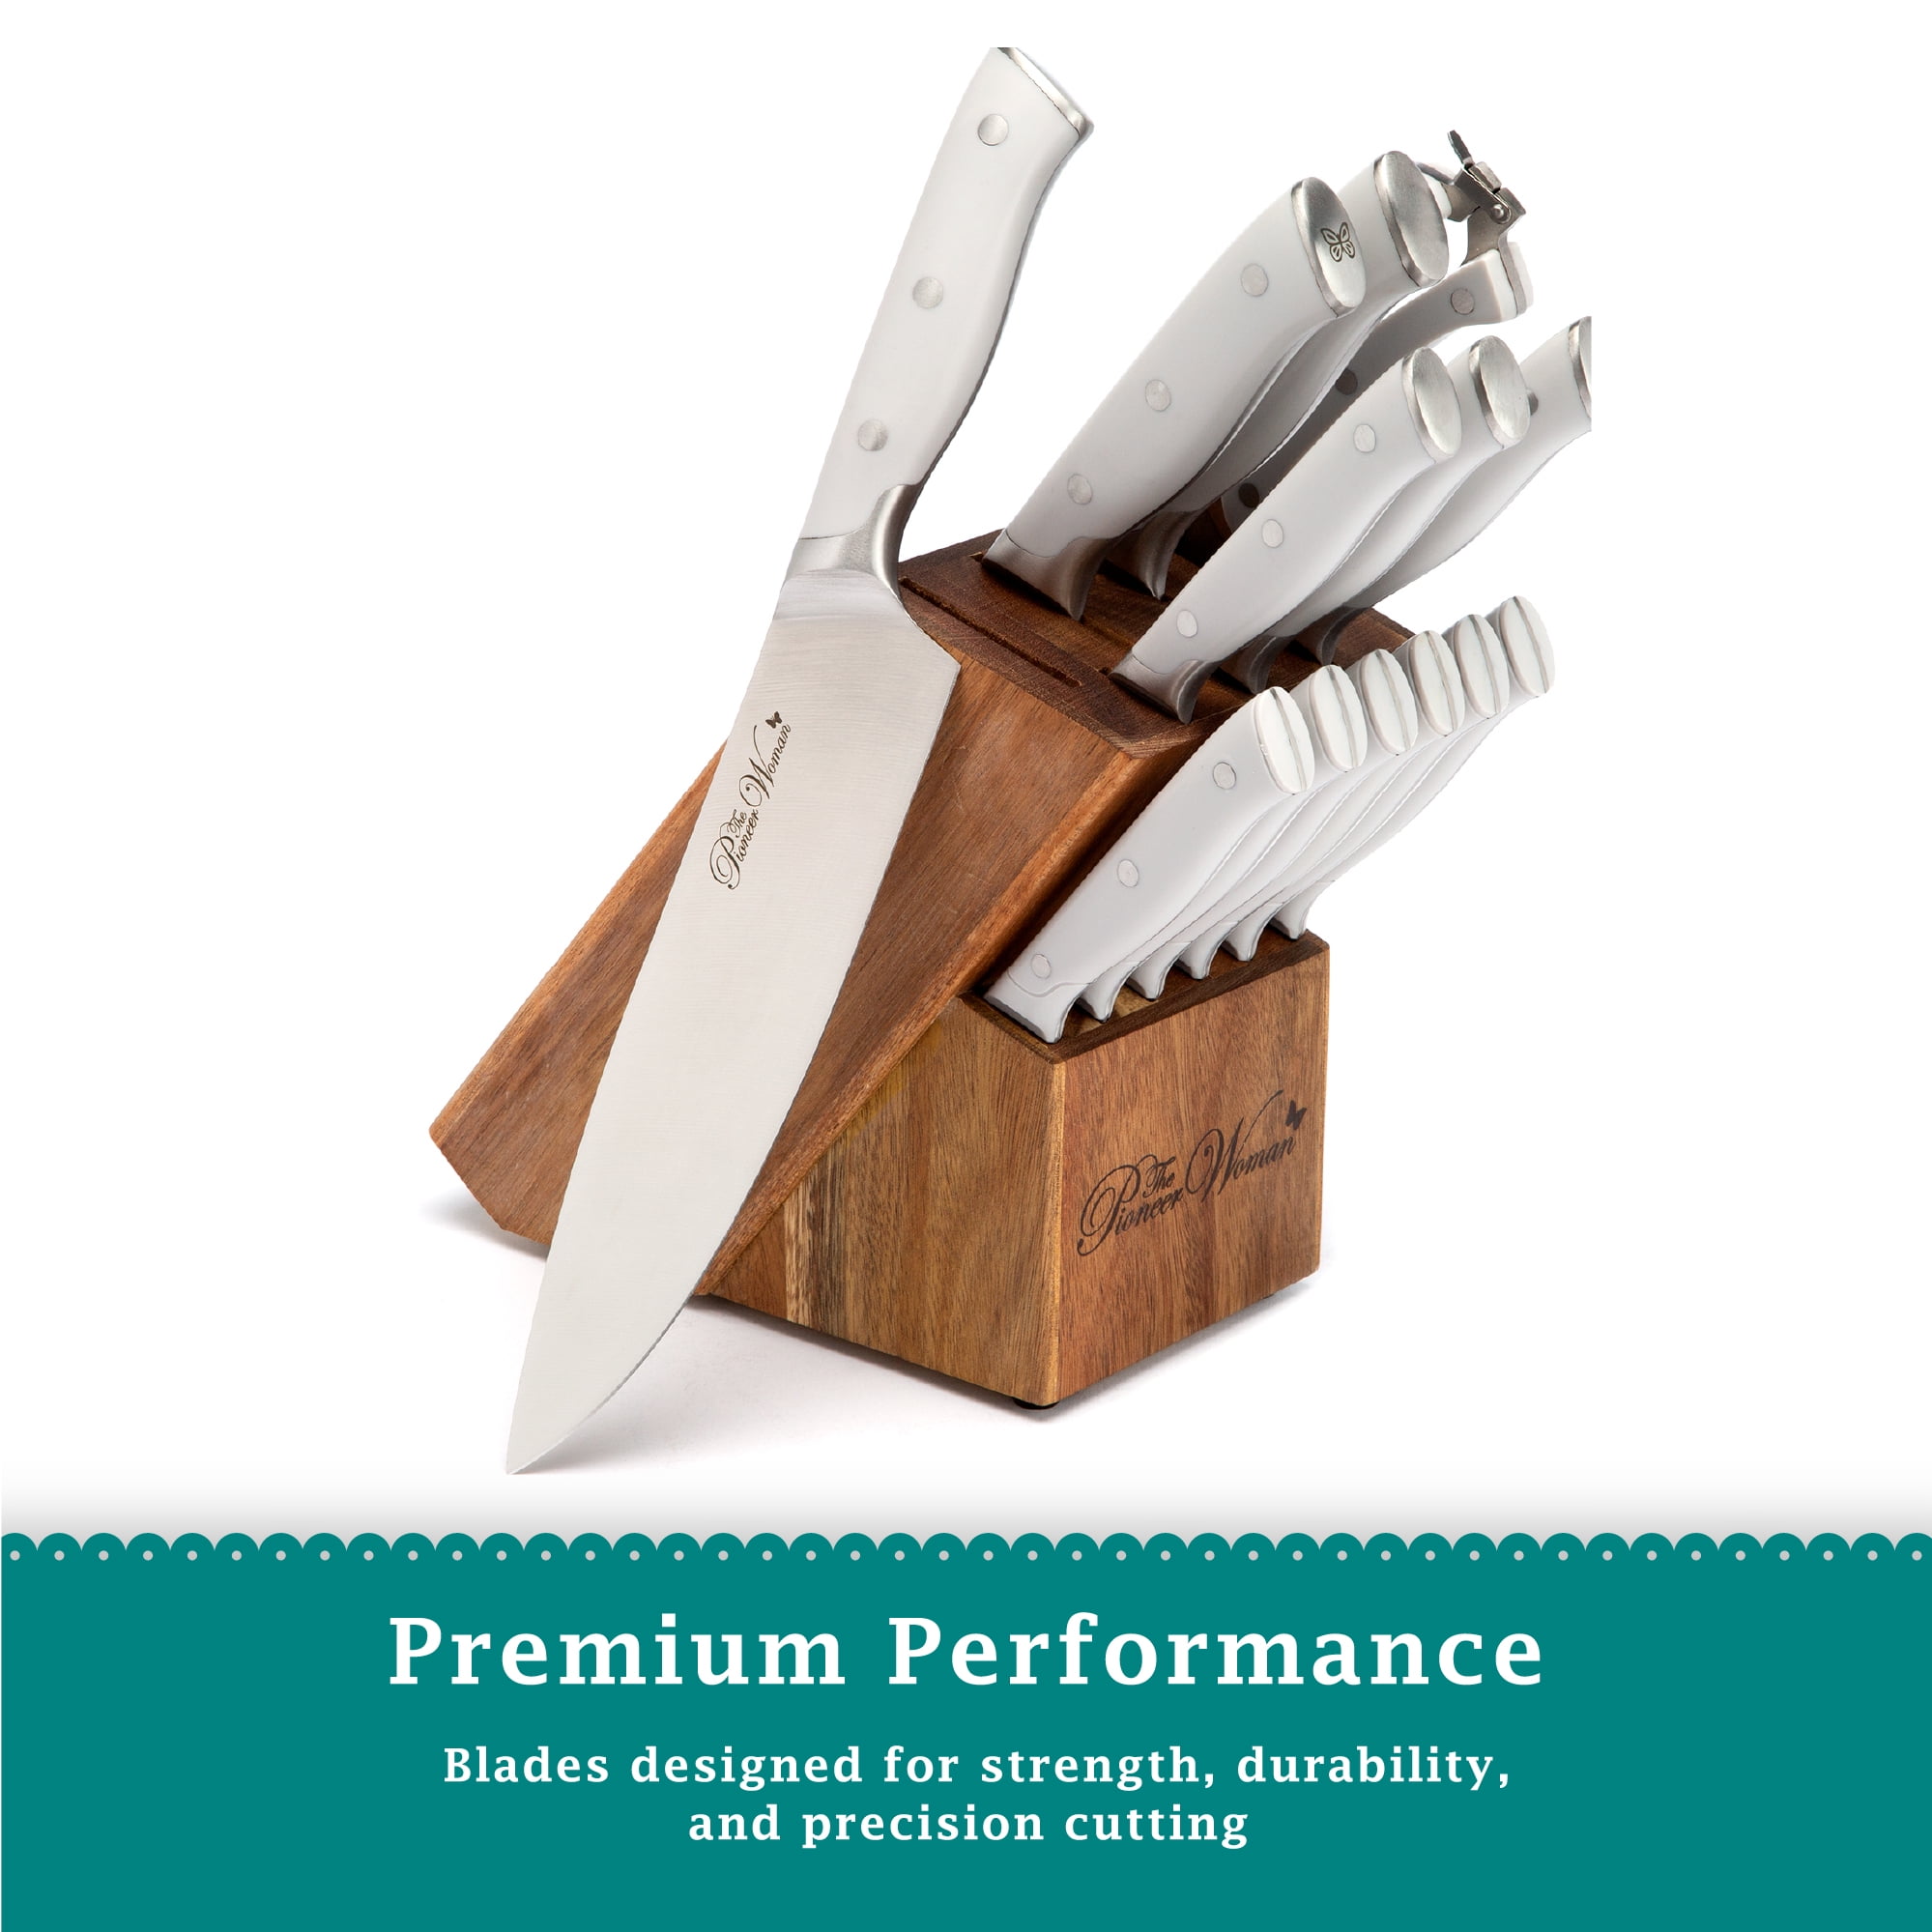 The Pioneer Woman Pioneer Signature 14-Piece Stainless Steel Knife Block Set, Floral